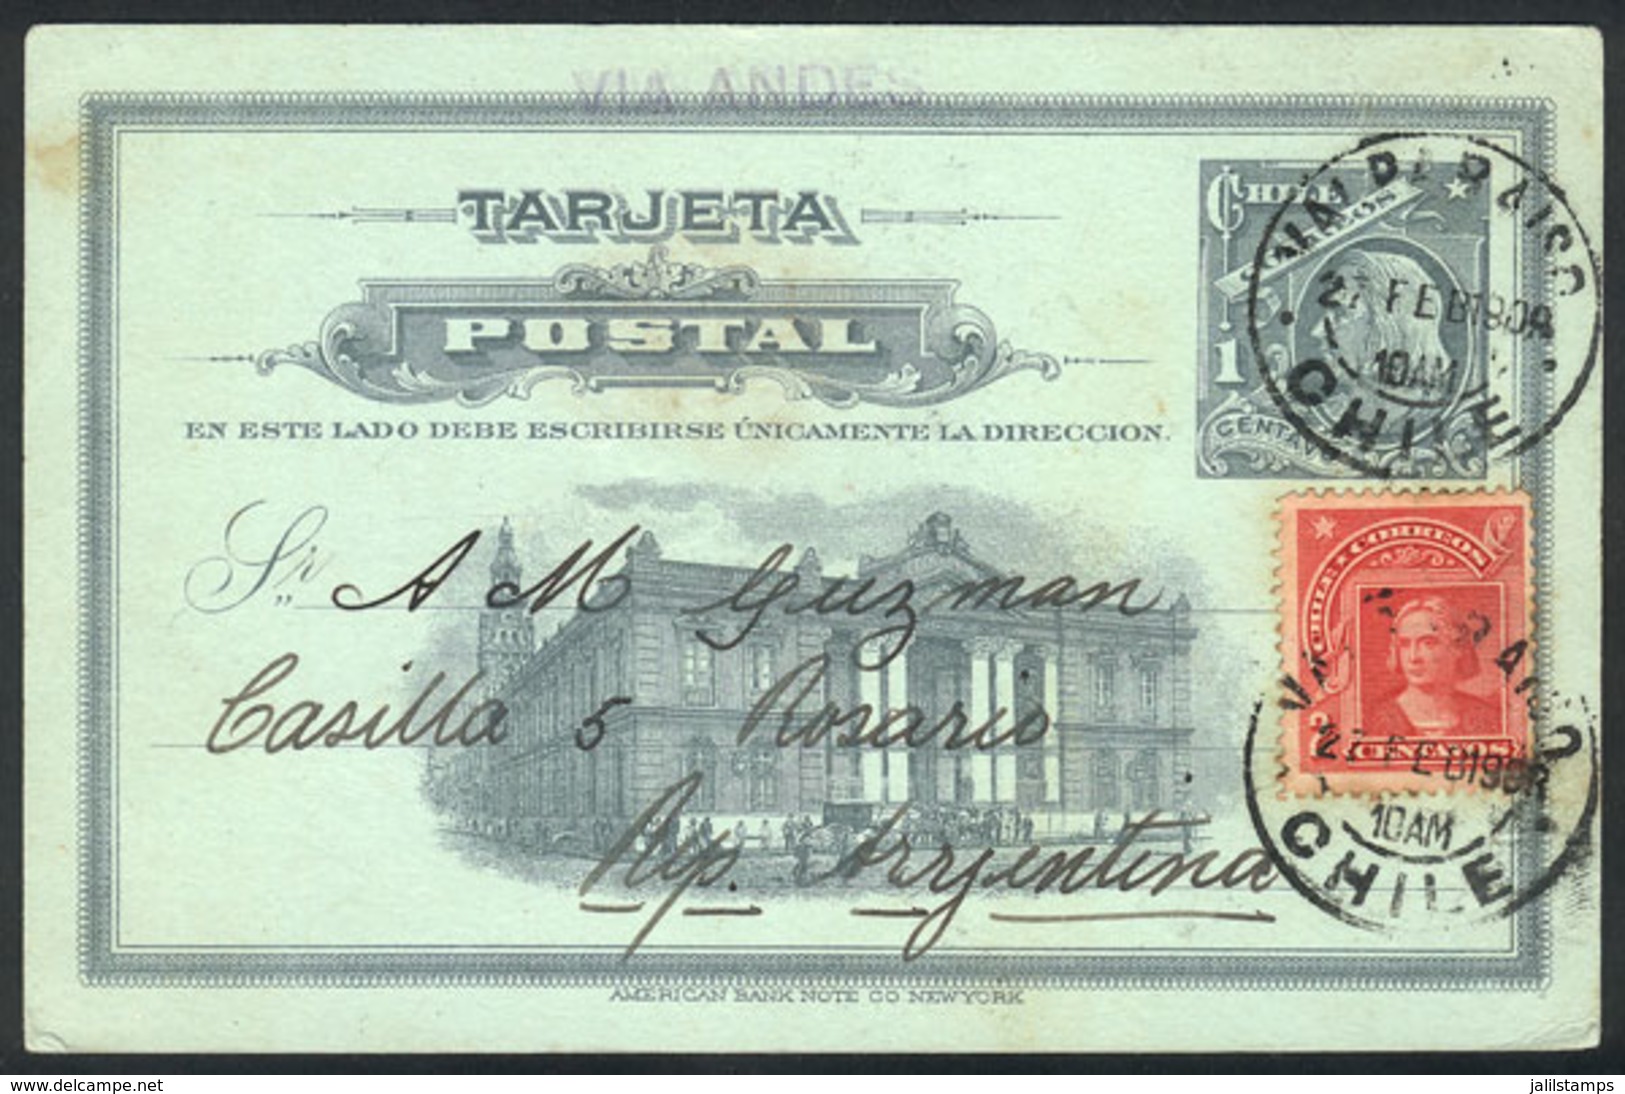 CHILE: 1c. Postal Card Uprated With 2c. Columbus, Sent From Valparaiso To Rosario On 27/FE/1909, VF Quality! - Chile